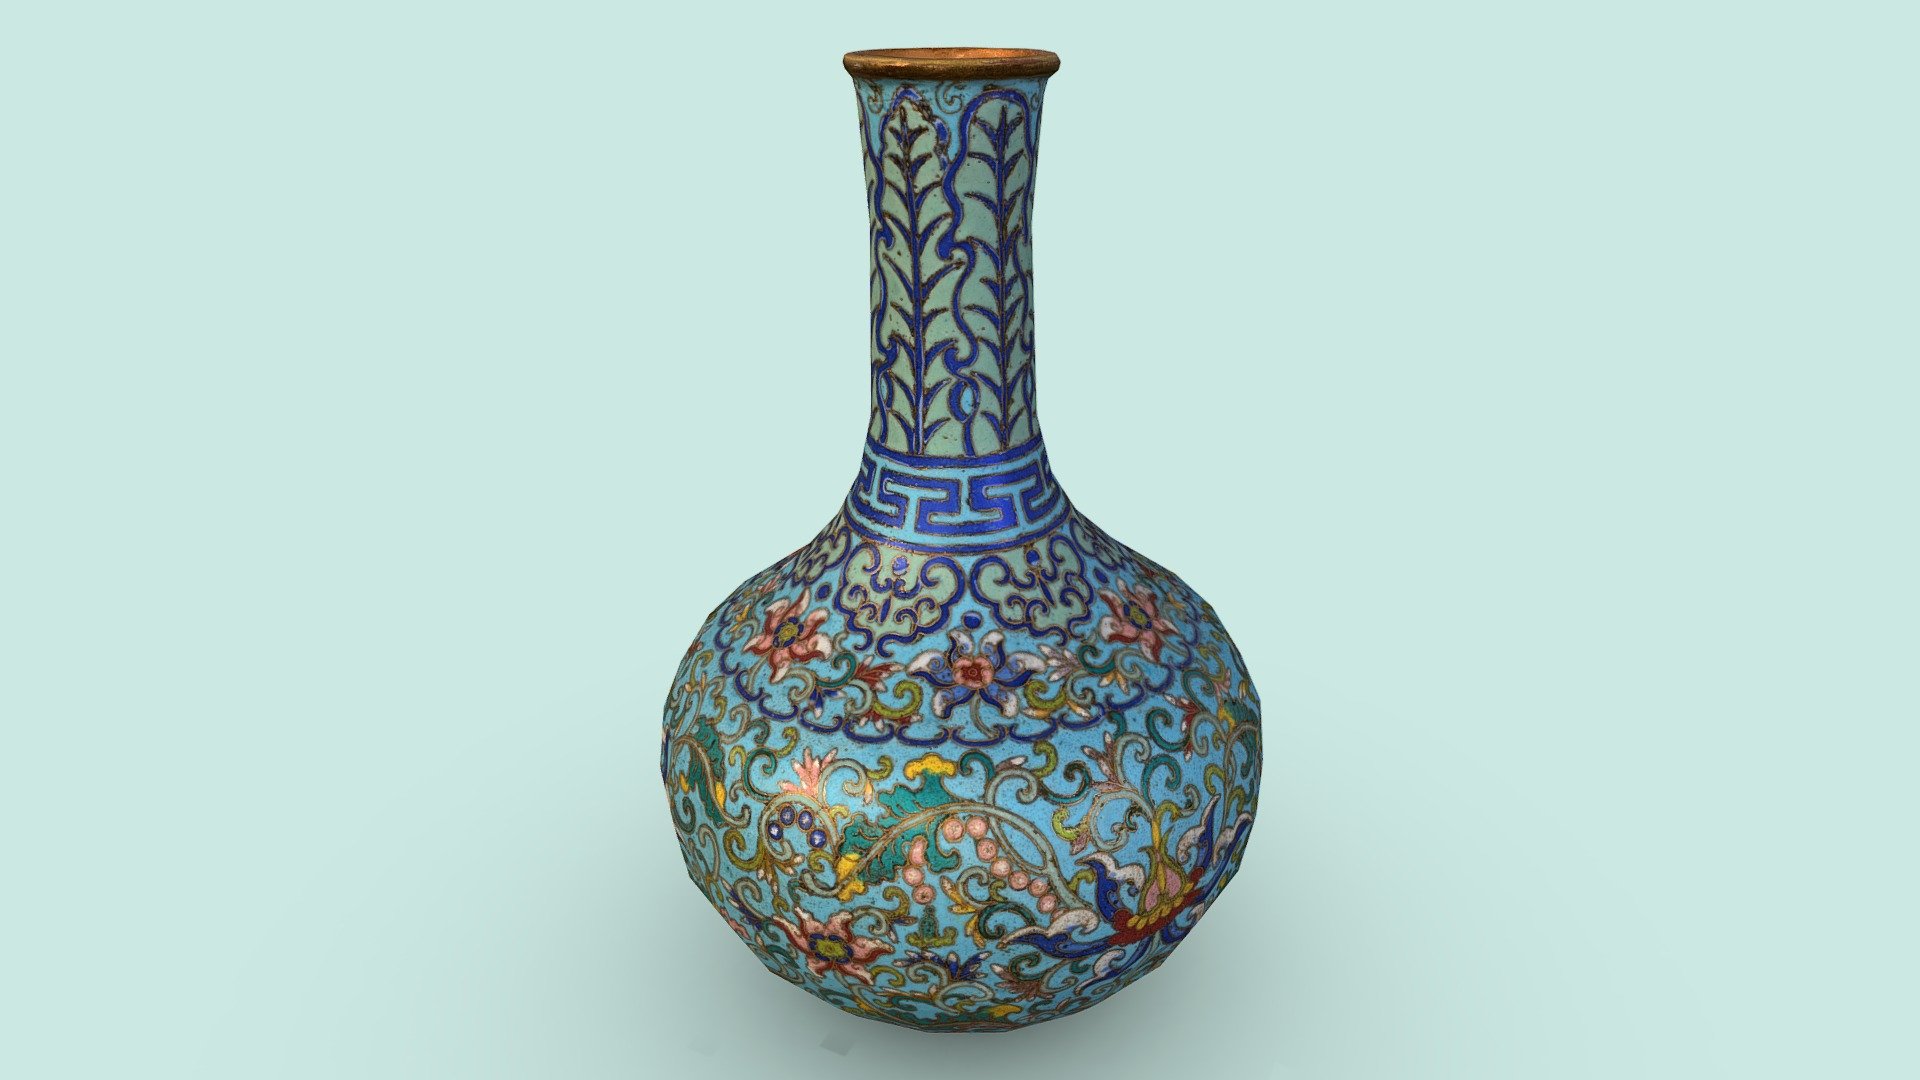 A low poly/game ready rework of the model originally released under the public domain by the Minneapolis Institute of Art. An enameled copper vase, made in China during the 18th century. 

Includes 4k diffuse/normal (inverted Y)/roughness/specular maps - Chinese Cloisonné Vase - Low Poly/Game-Ready - Download Free 3D model by revenorror 3d model